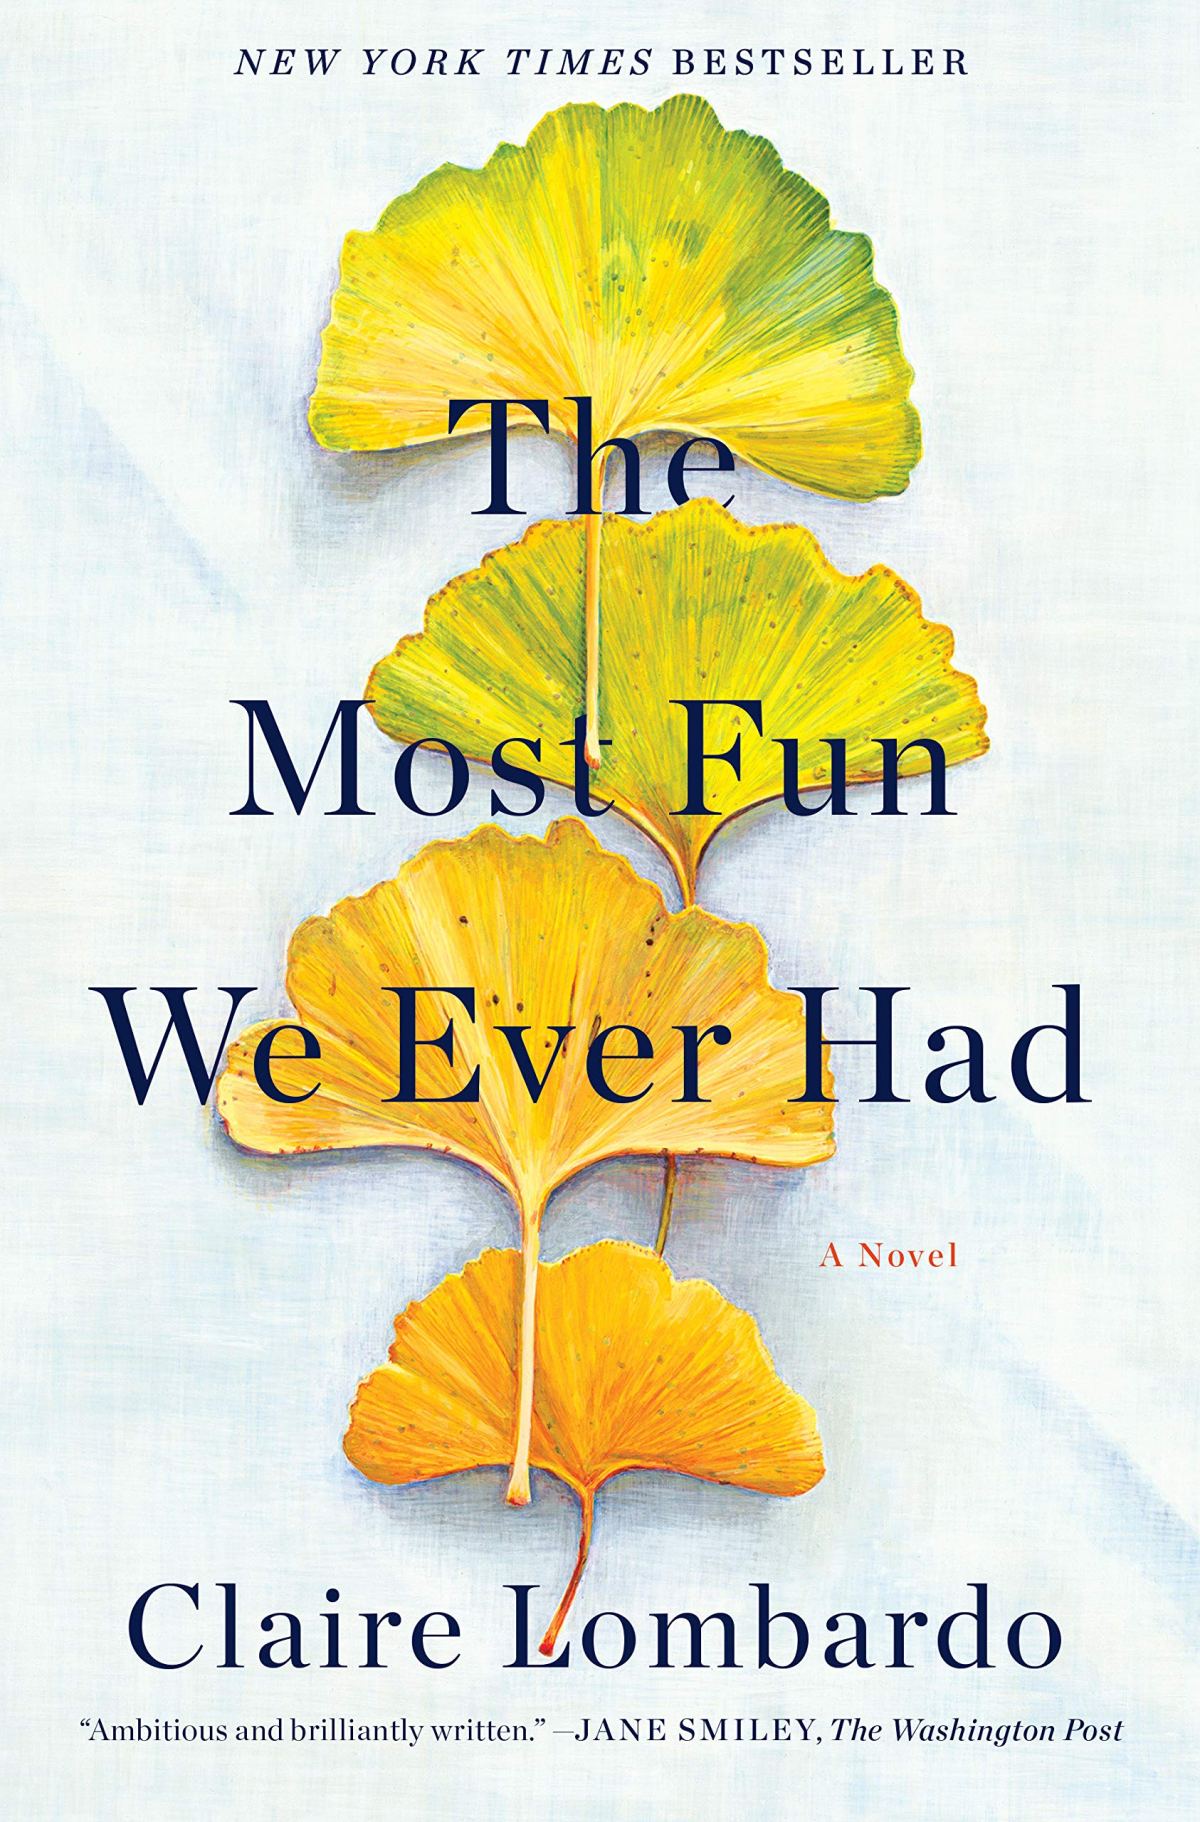 Book 120 – The Most Fun We Ever Had by Claire Lombardo